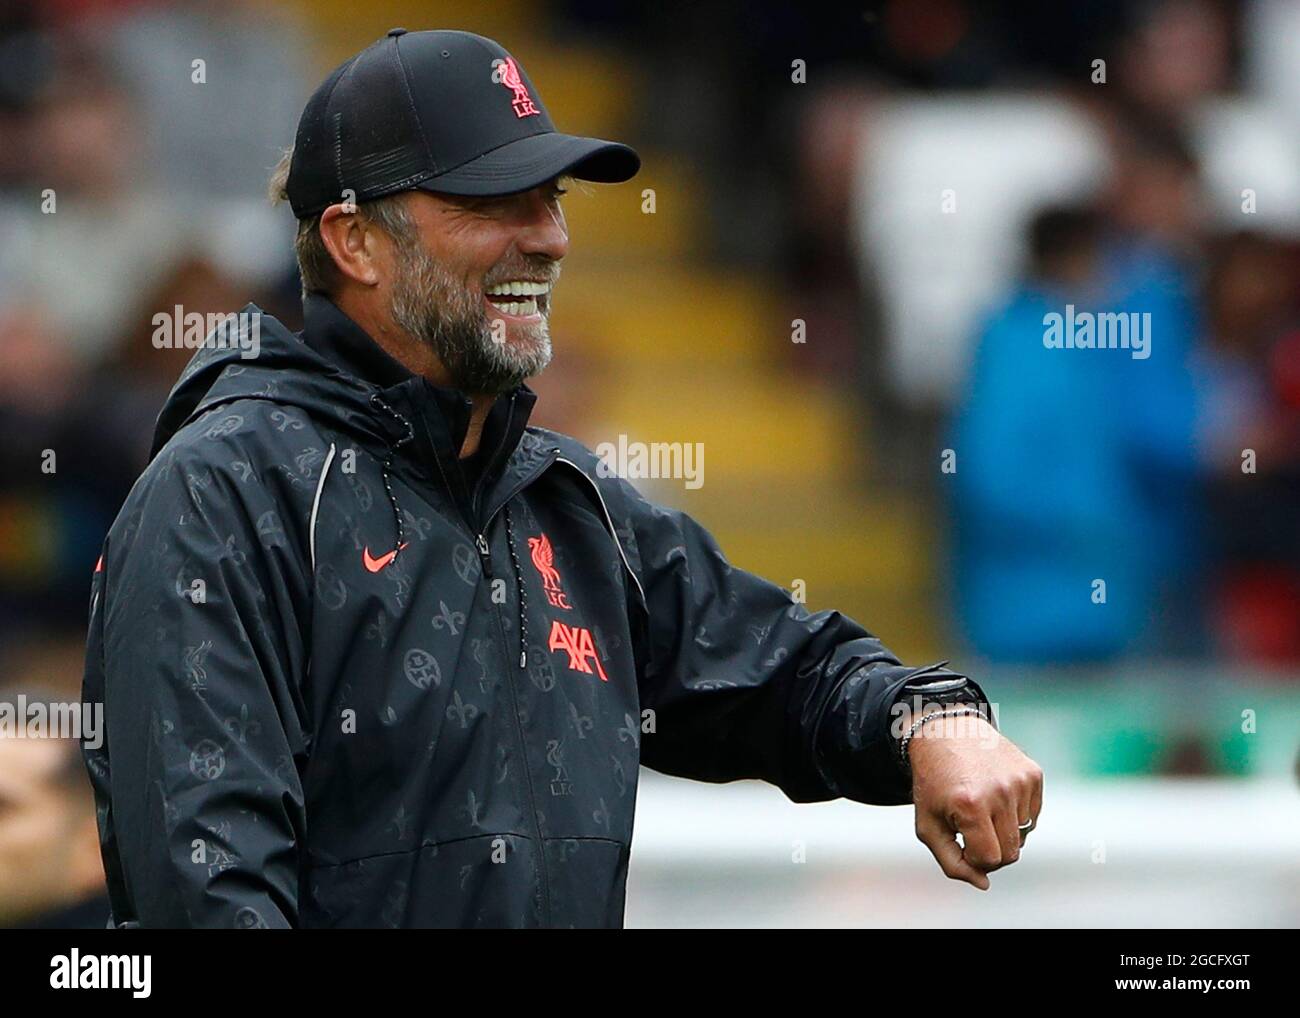 Liverpool, England, 8th August 2021.  Jurgen Klopp manager of Liverpool looks at his watch after kick off was delayed for the Pre Season Friendly match at Anfield, Liverpool. Picture credit should read: Darren Staples / Sportimage Stock Photo